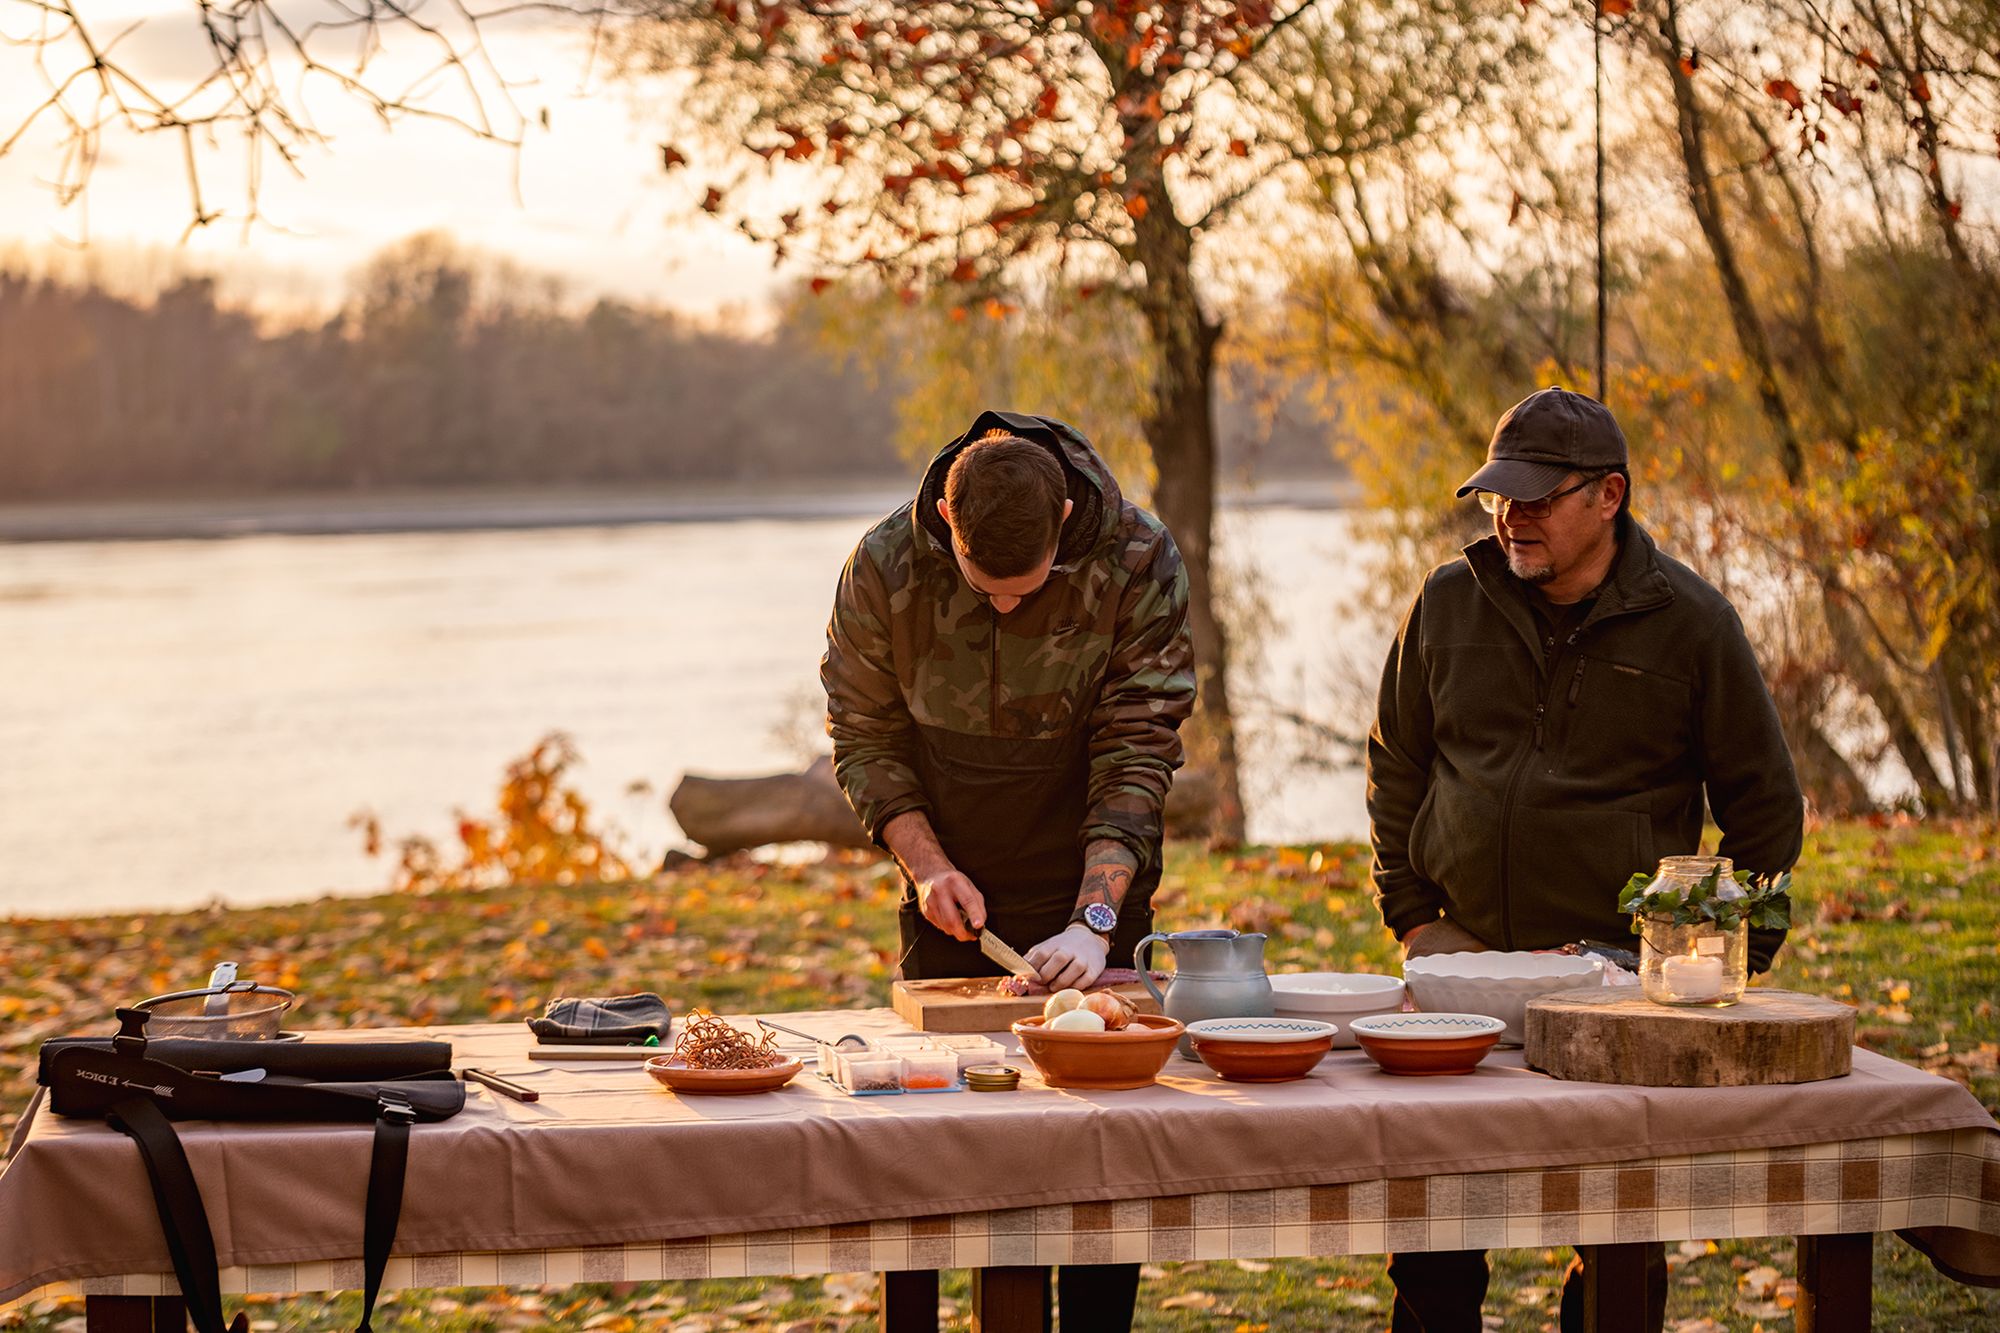 From the Dunakeszi specialty café to the perfect fisherman’s soup experience | Piqniq Pack—Part 1